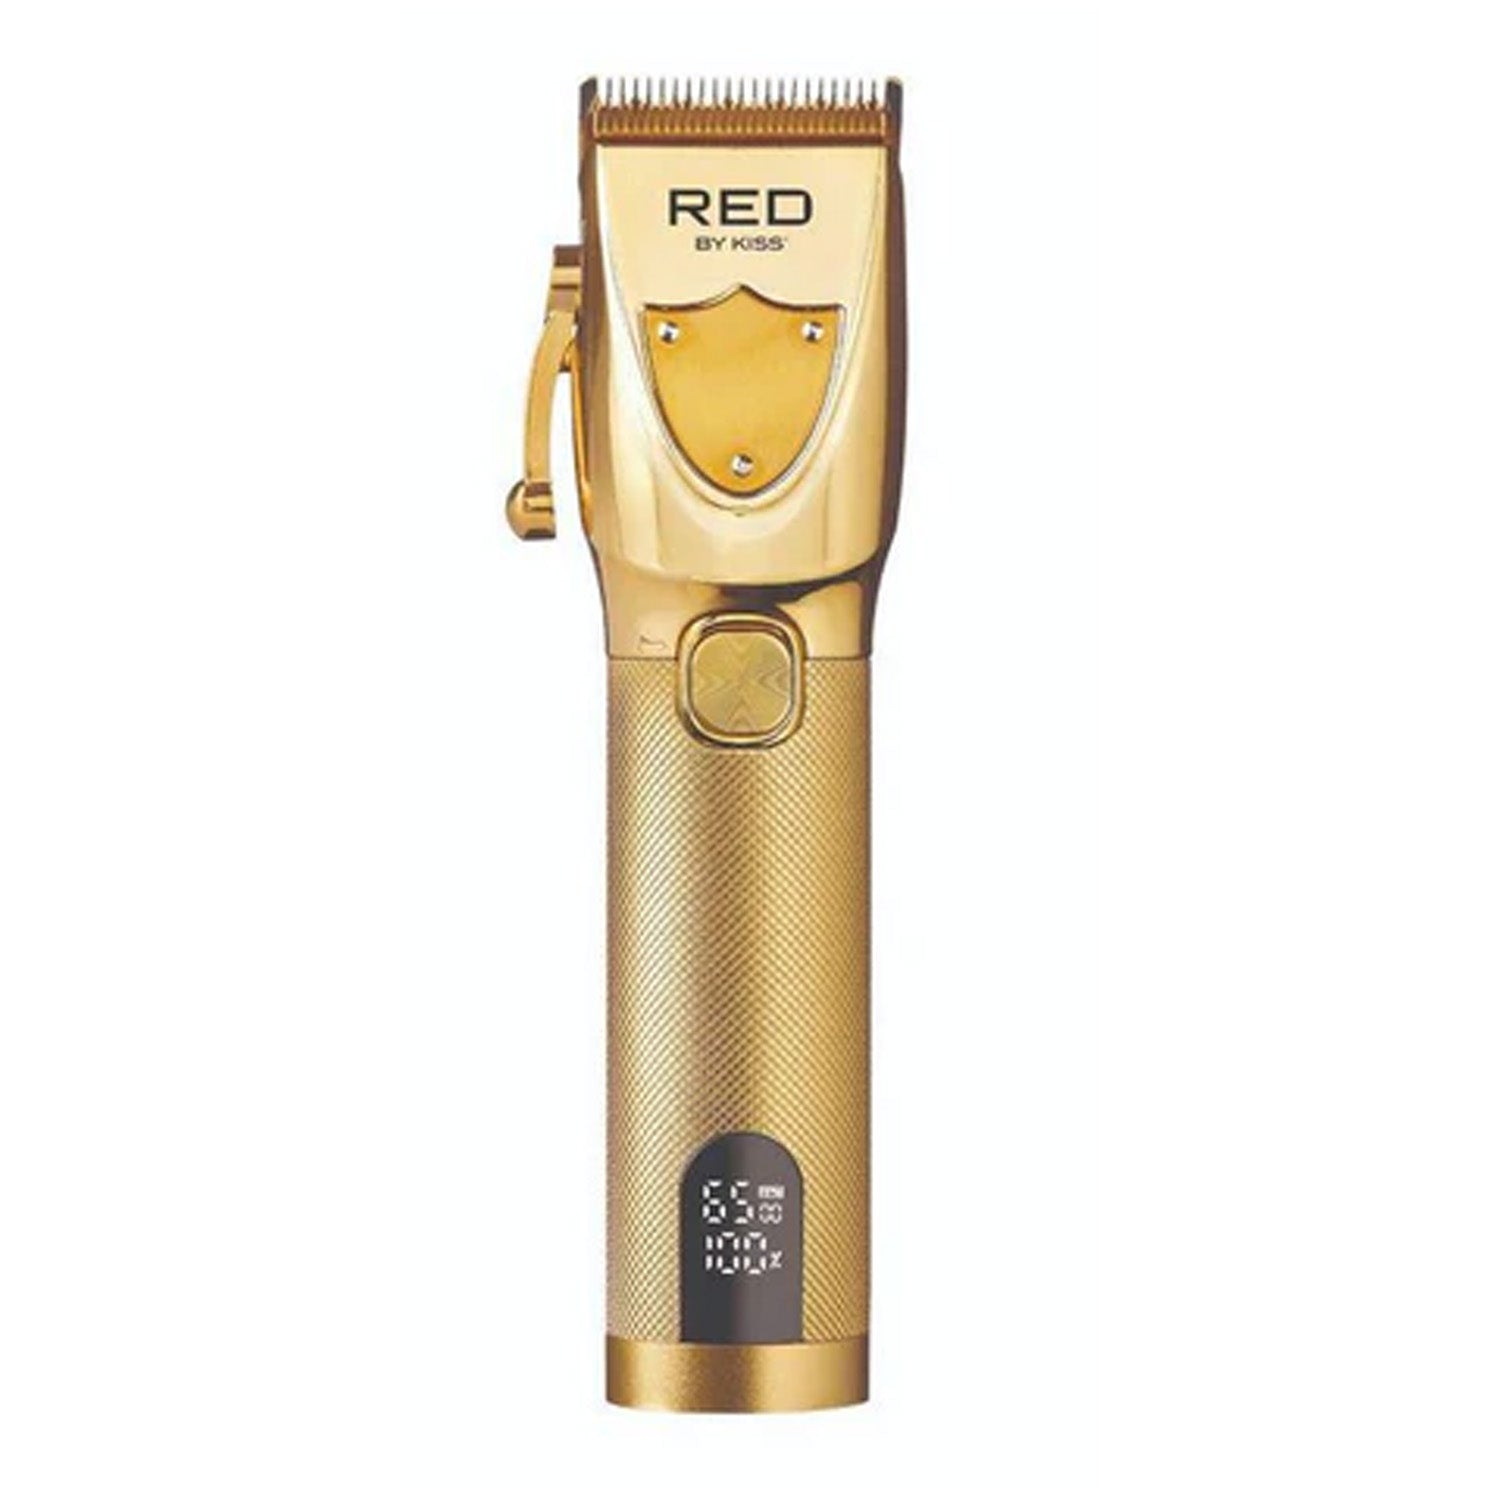 RED BY KISS ULTRA CLEAN CUT CORDLESS CLIPPER